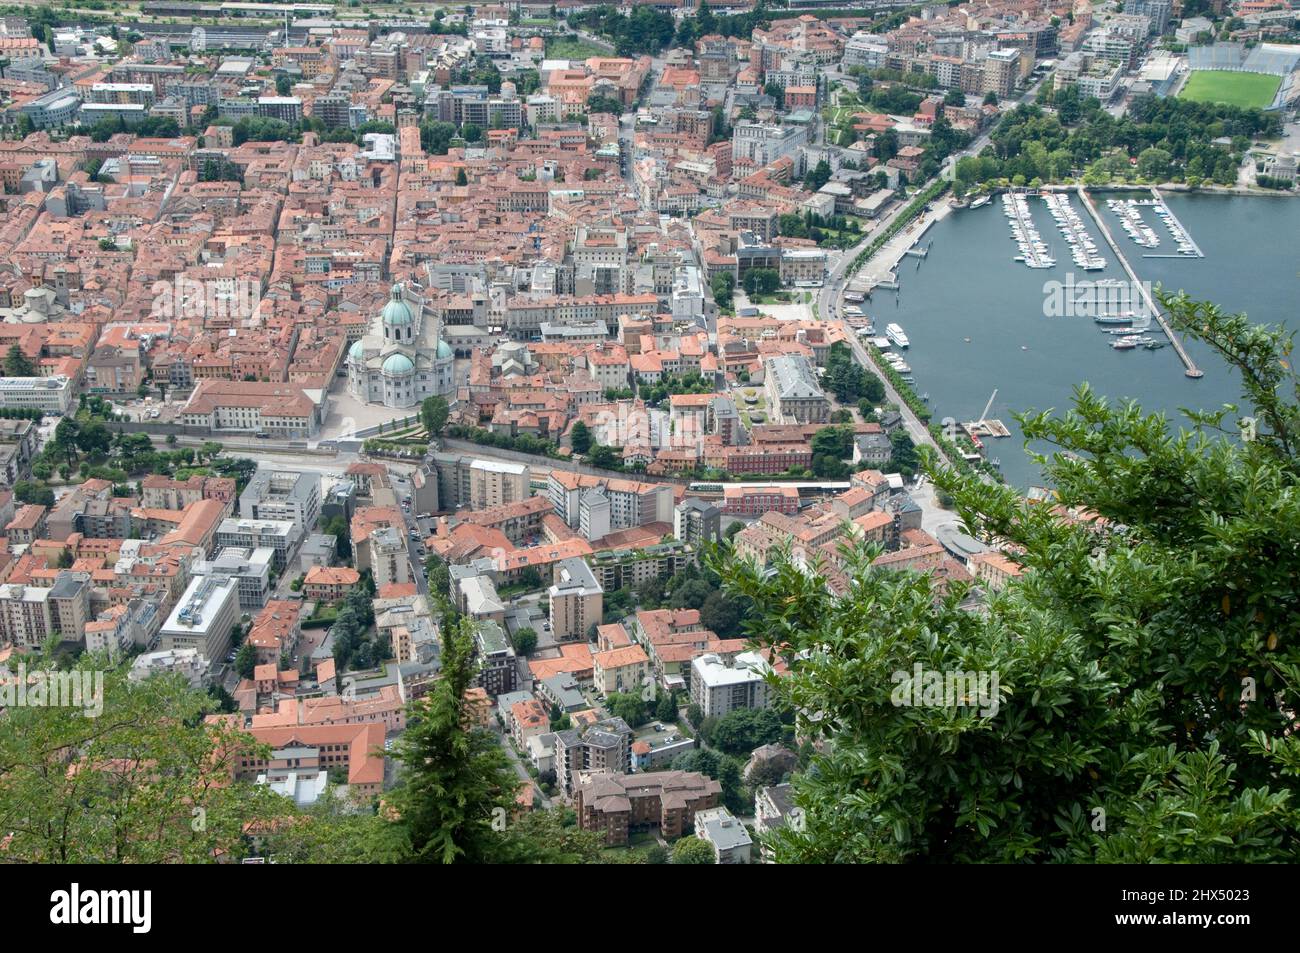 Back Roads Northern Italy - Drive 4, Back Roads Northern Italy, Italy, Lombardy, Lake Como, Como, view of city from Brunate Stock Photo